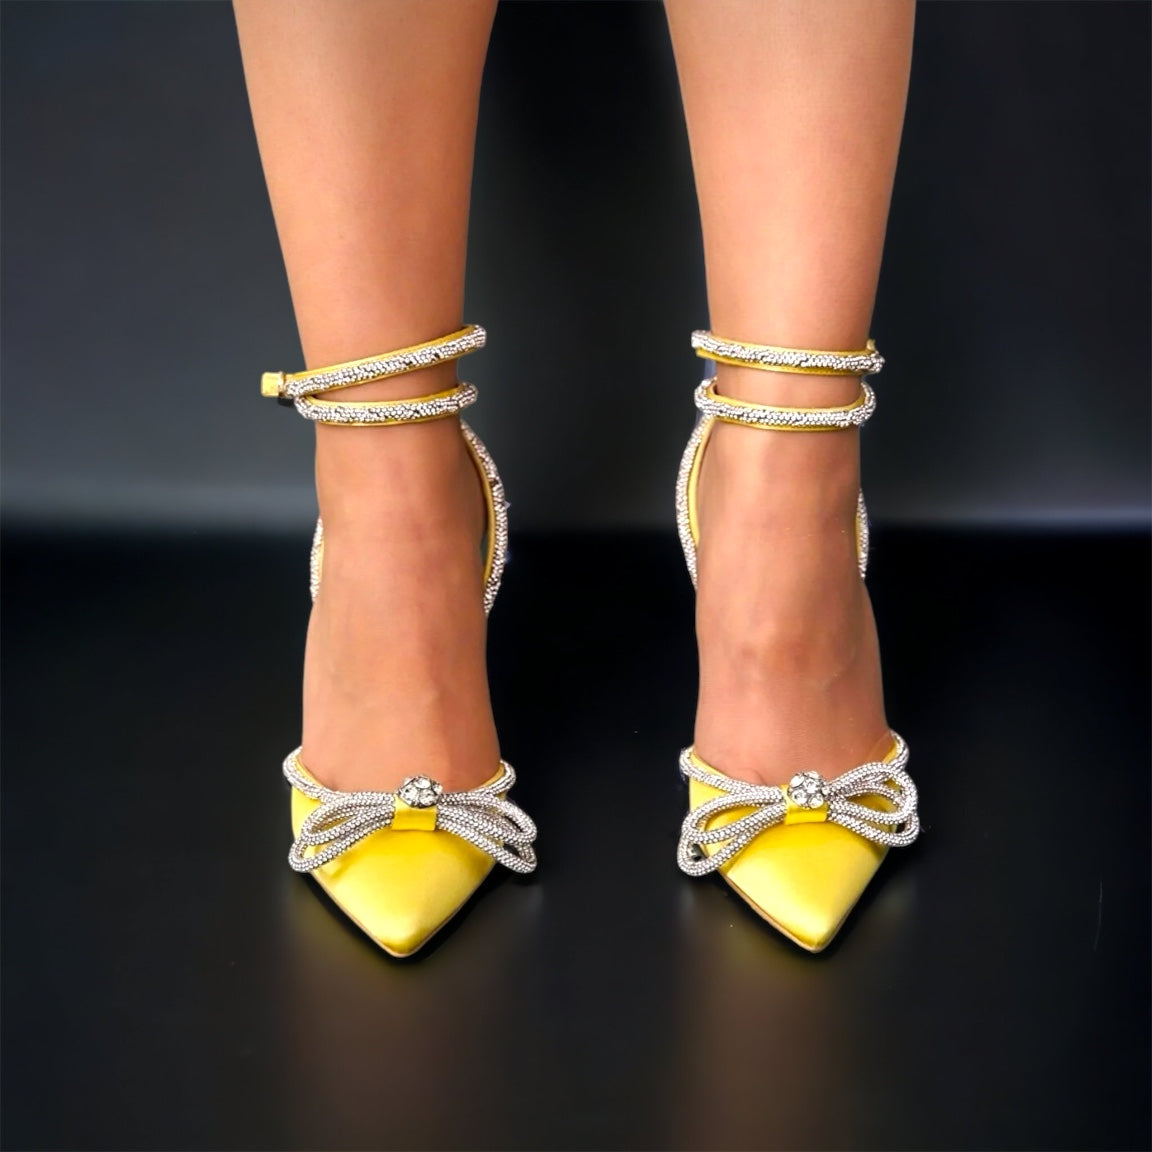 The Floransa Yellow Leather Pointy Toe Ankle Strap Women Sandal